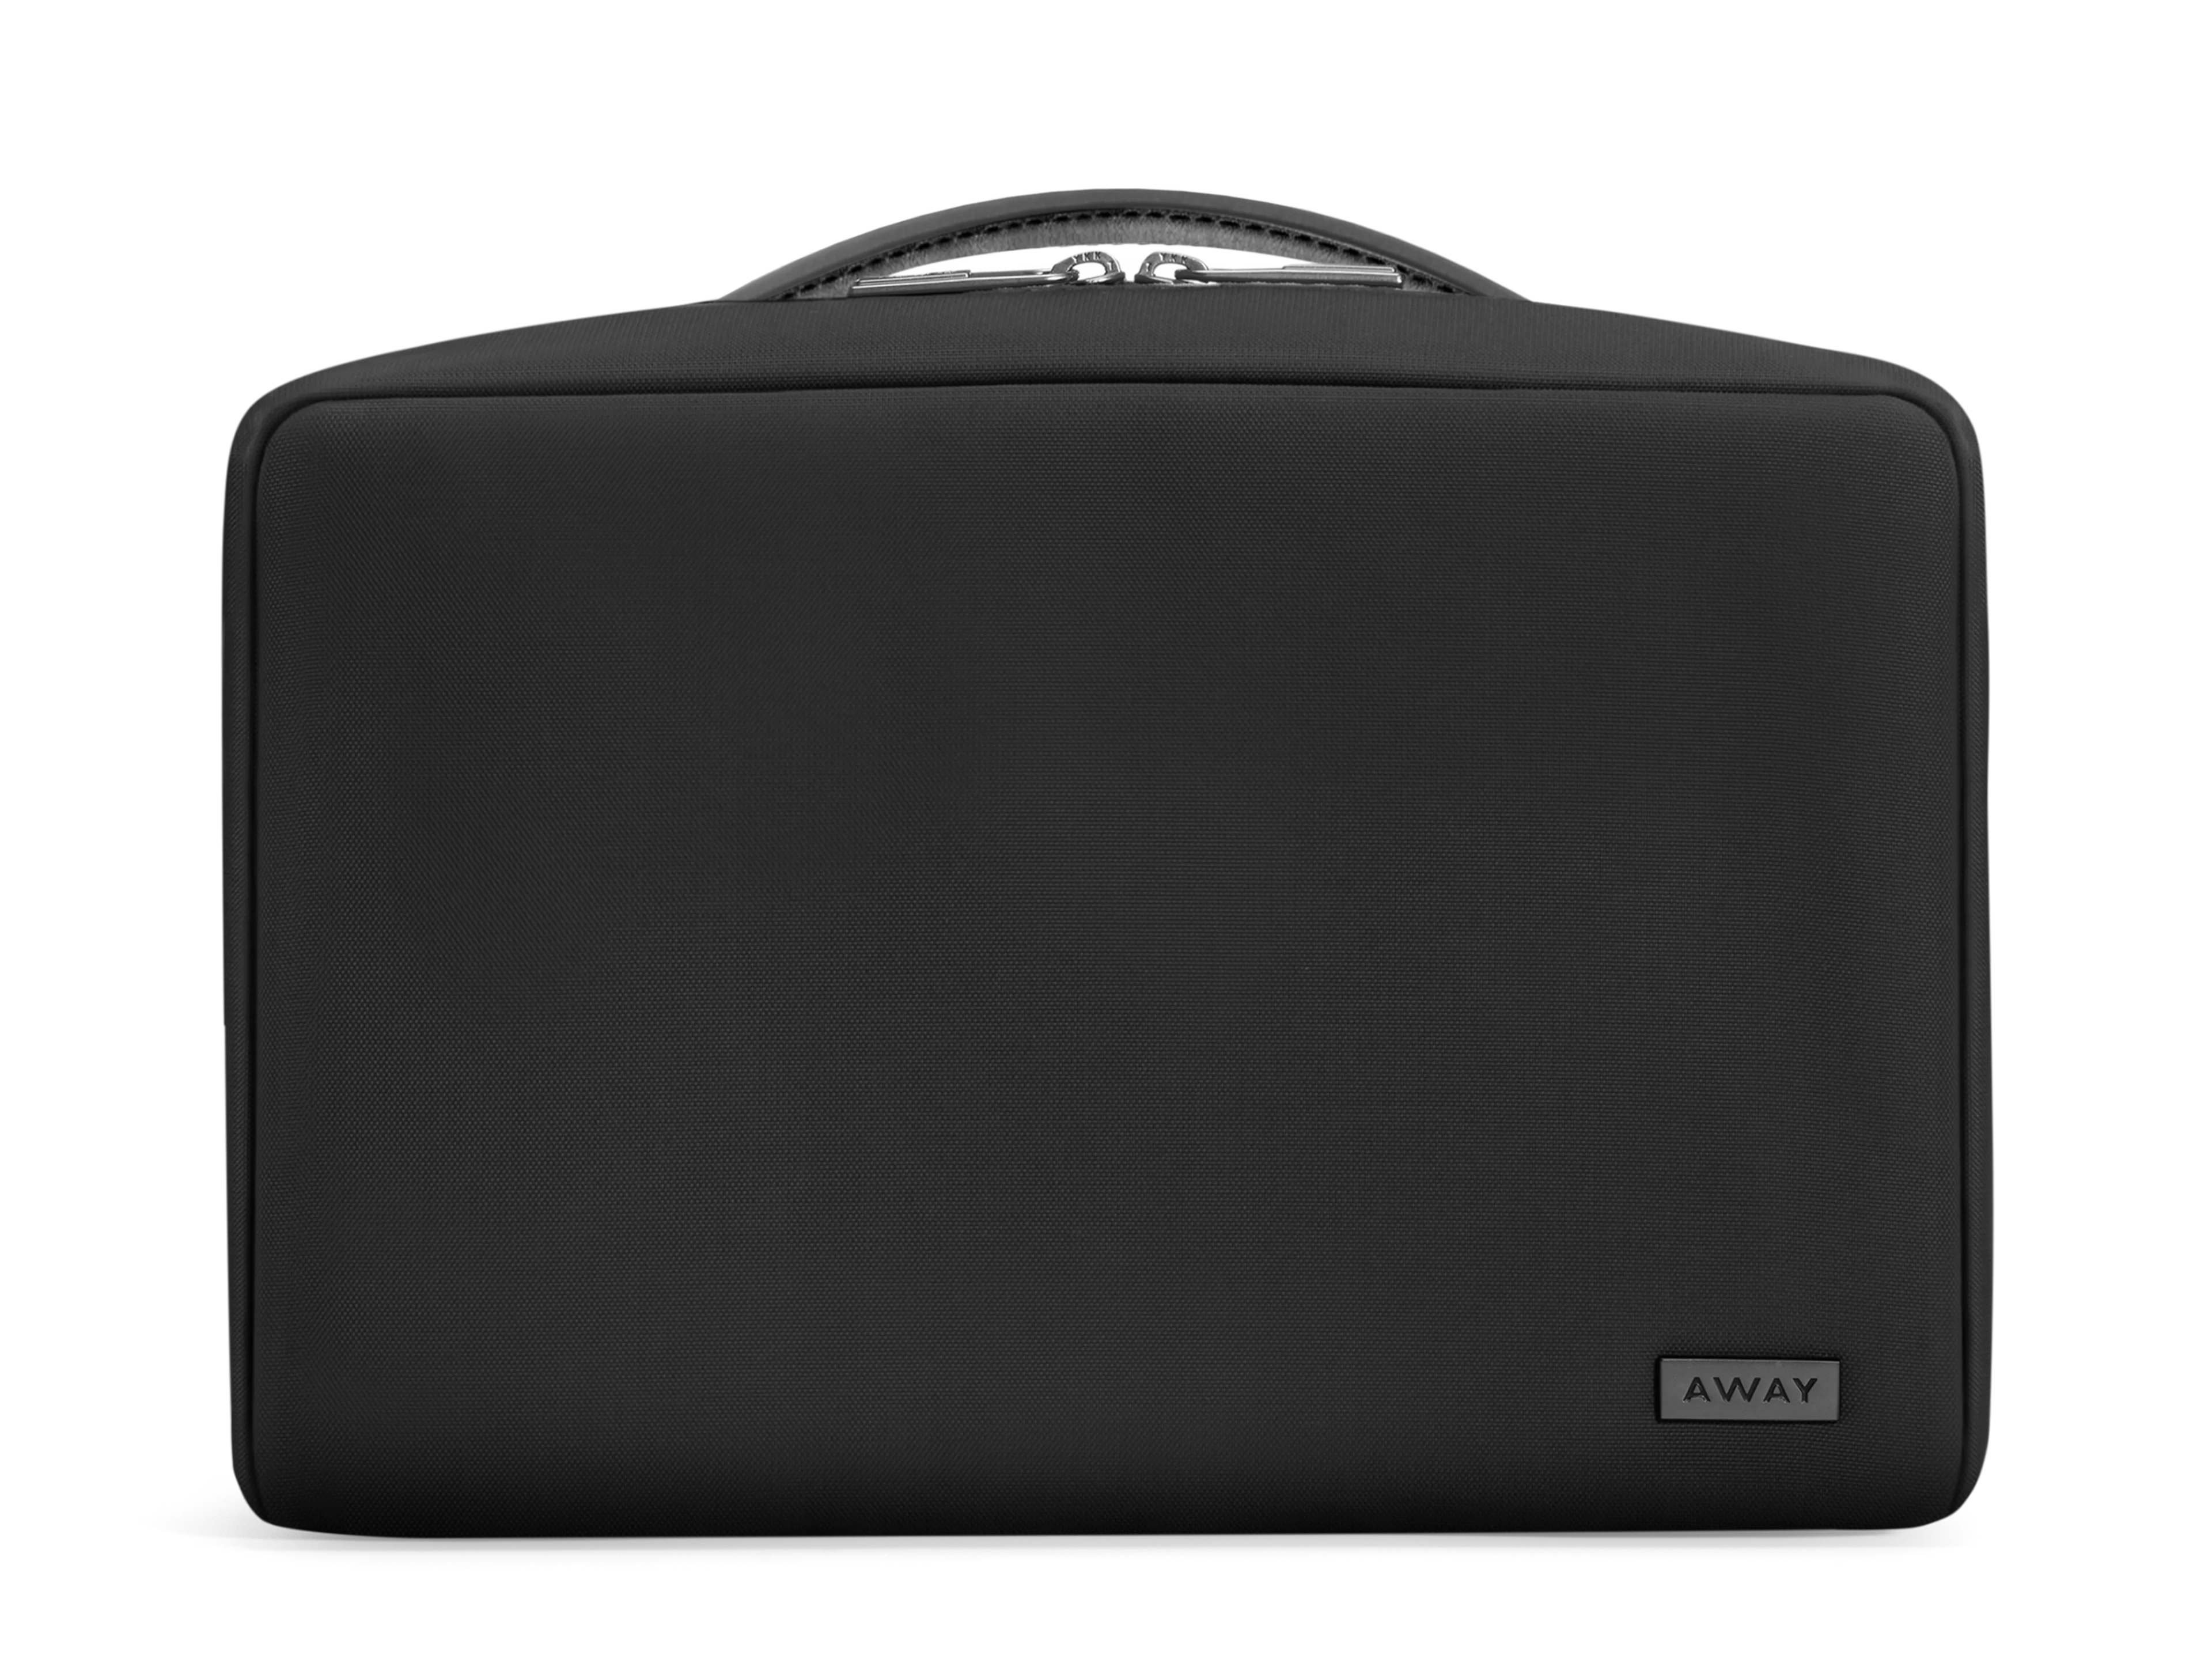 The Small Toiletry Bag Black